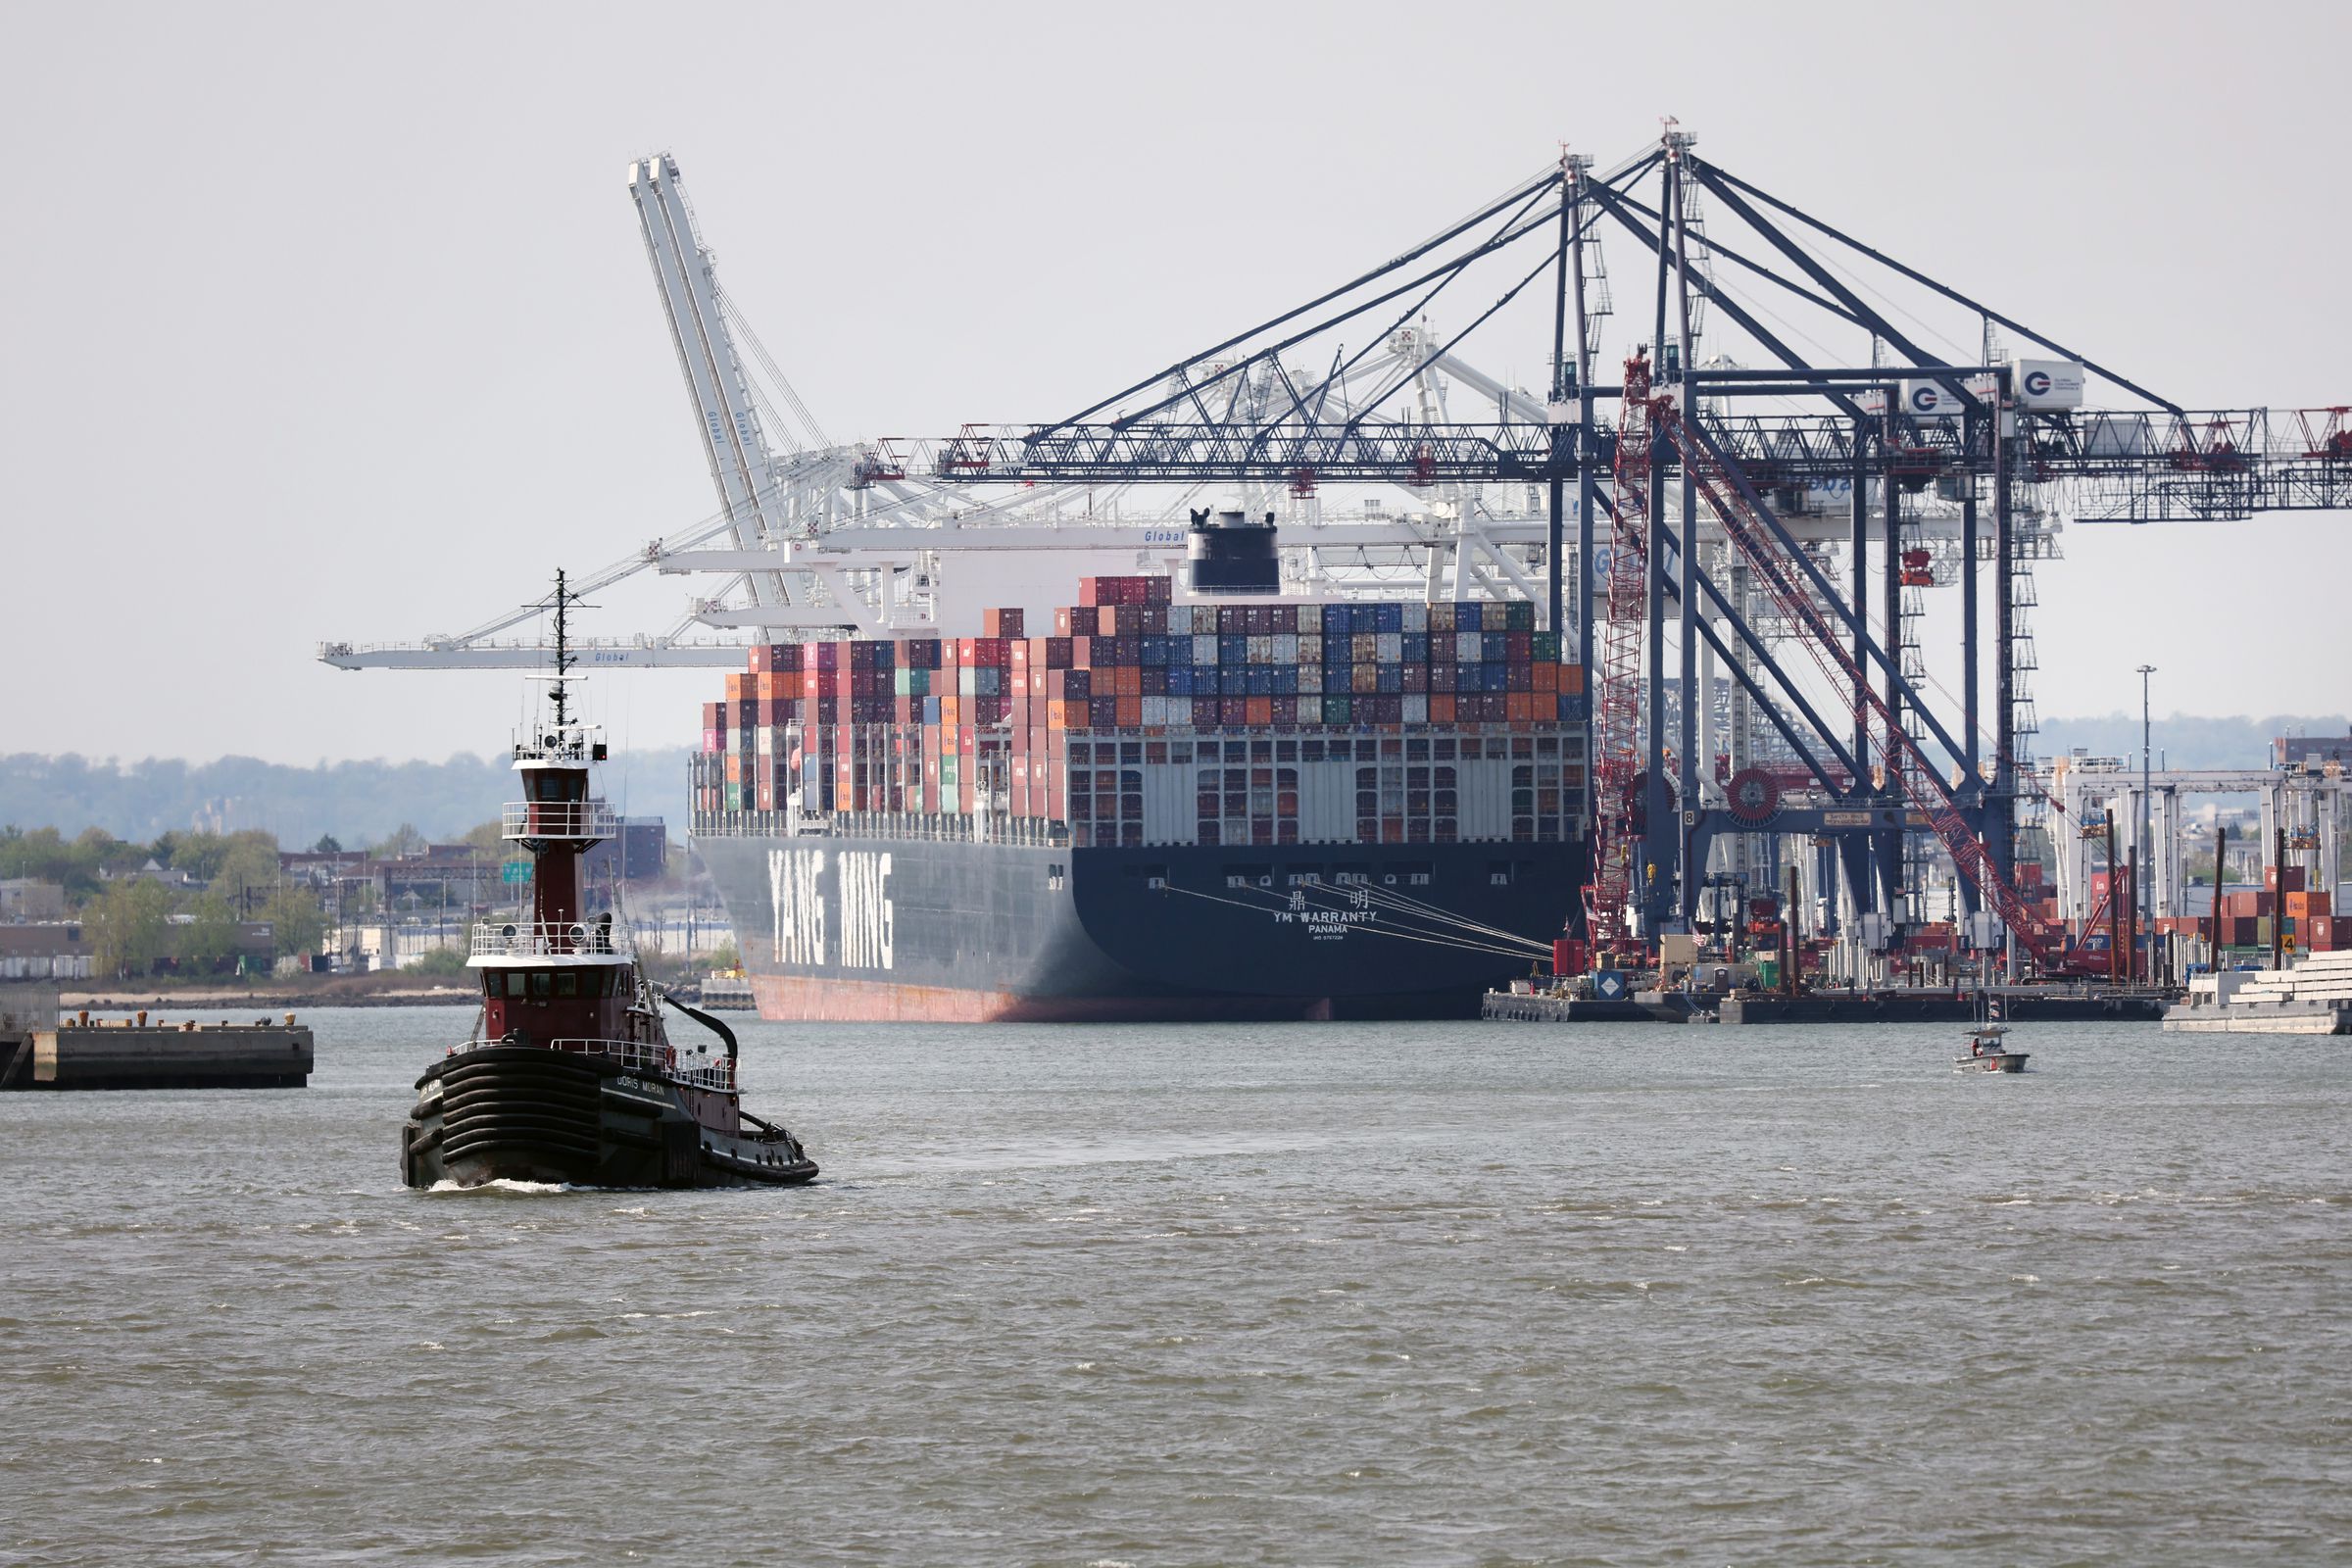 A cargo ship loaded with shipping containers sits on the water next to a port.